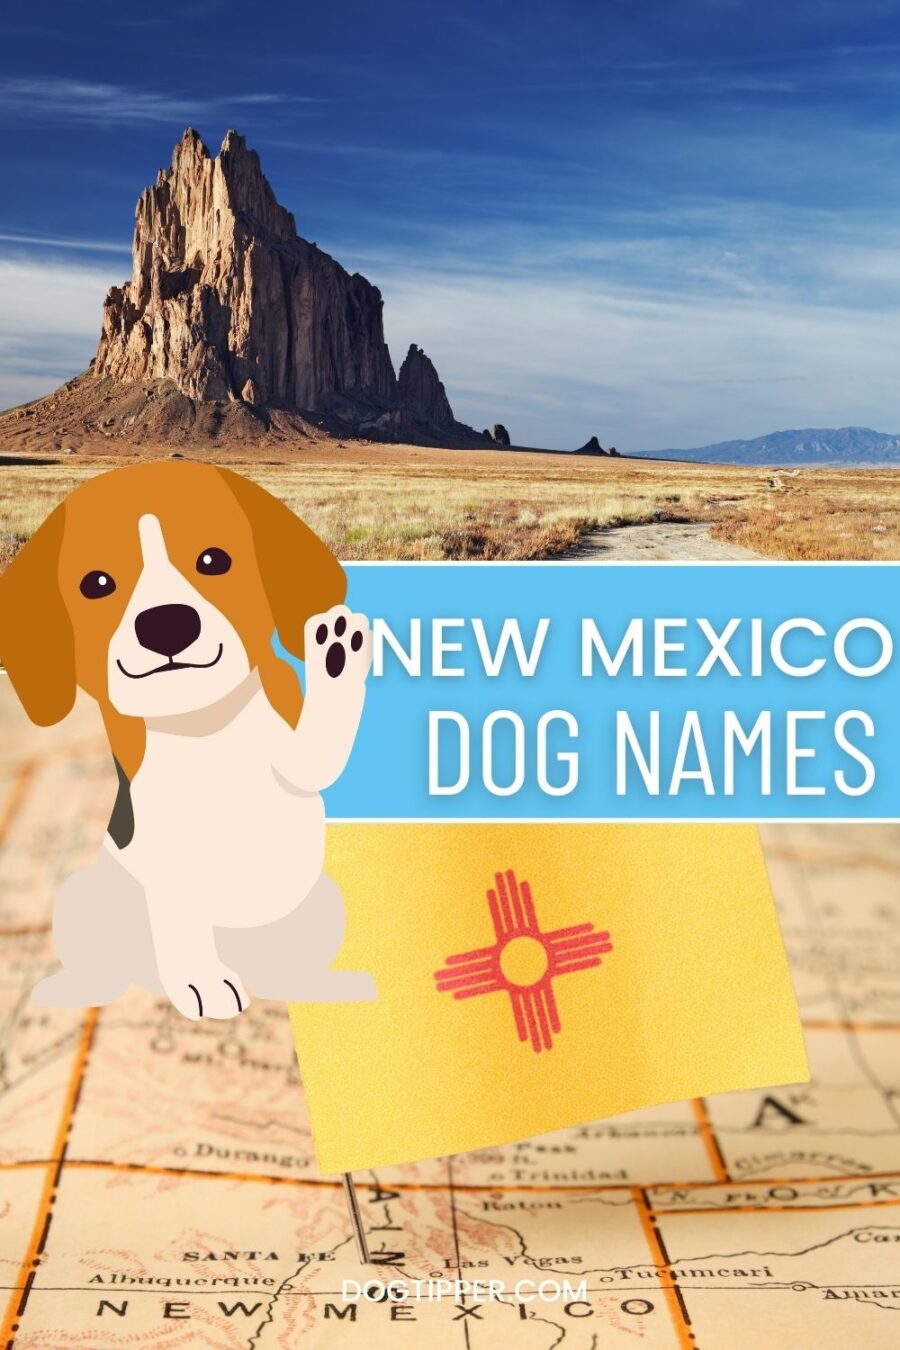 New Mexico Dog Names based on place names, Native American names, New Mexico symbols and more